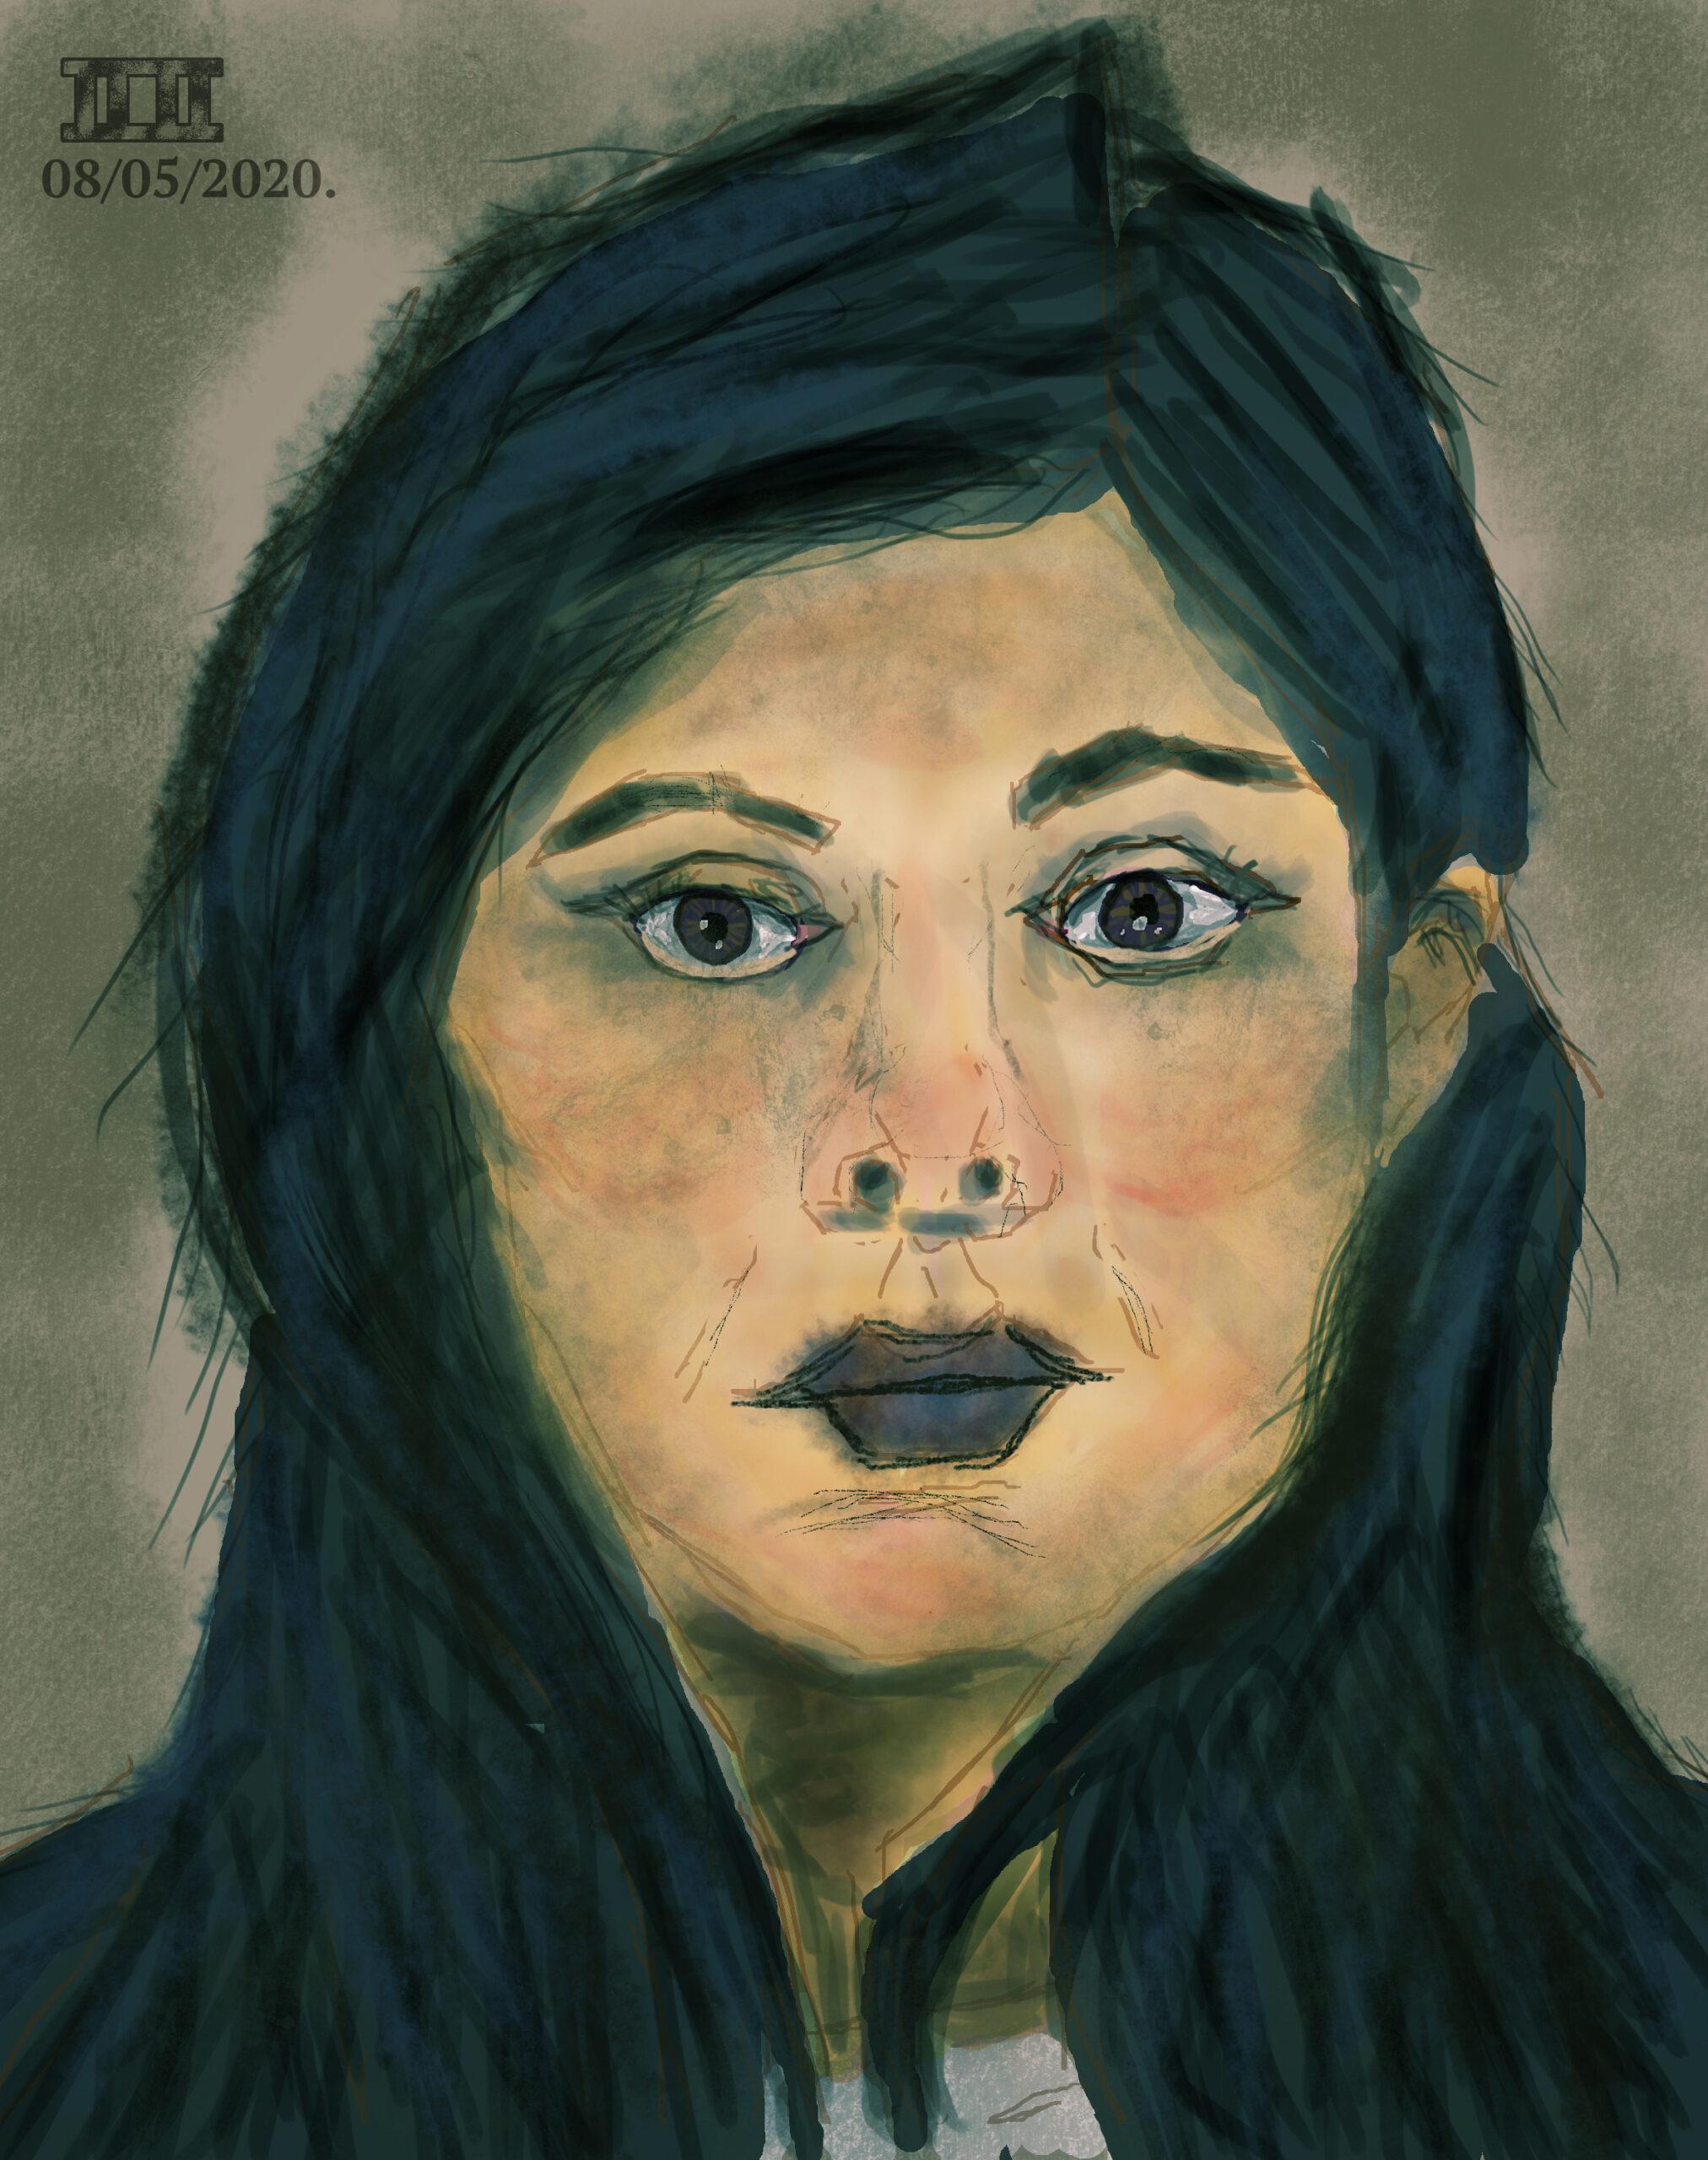 Sister by Mark Perez Ortiz - Painting by Unknown